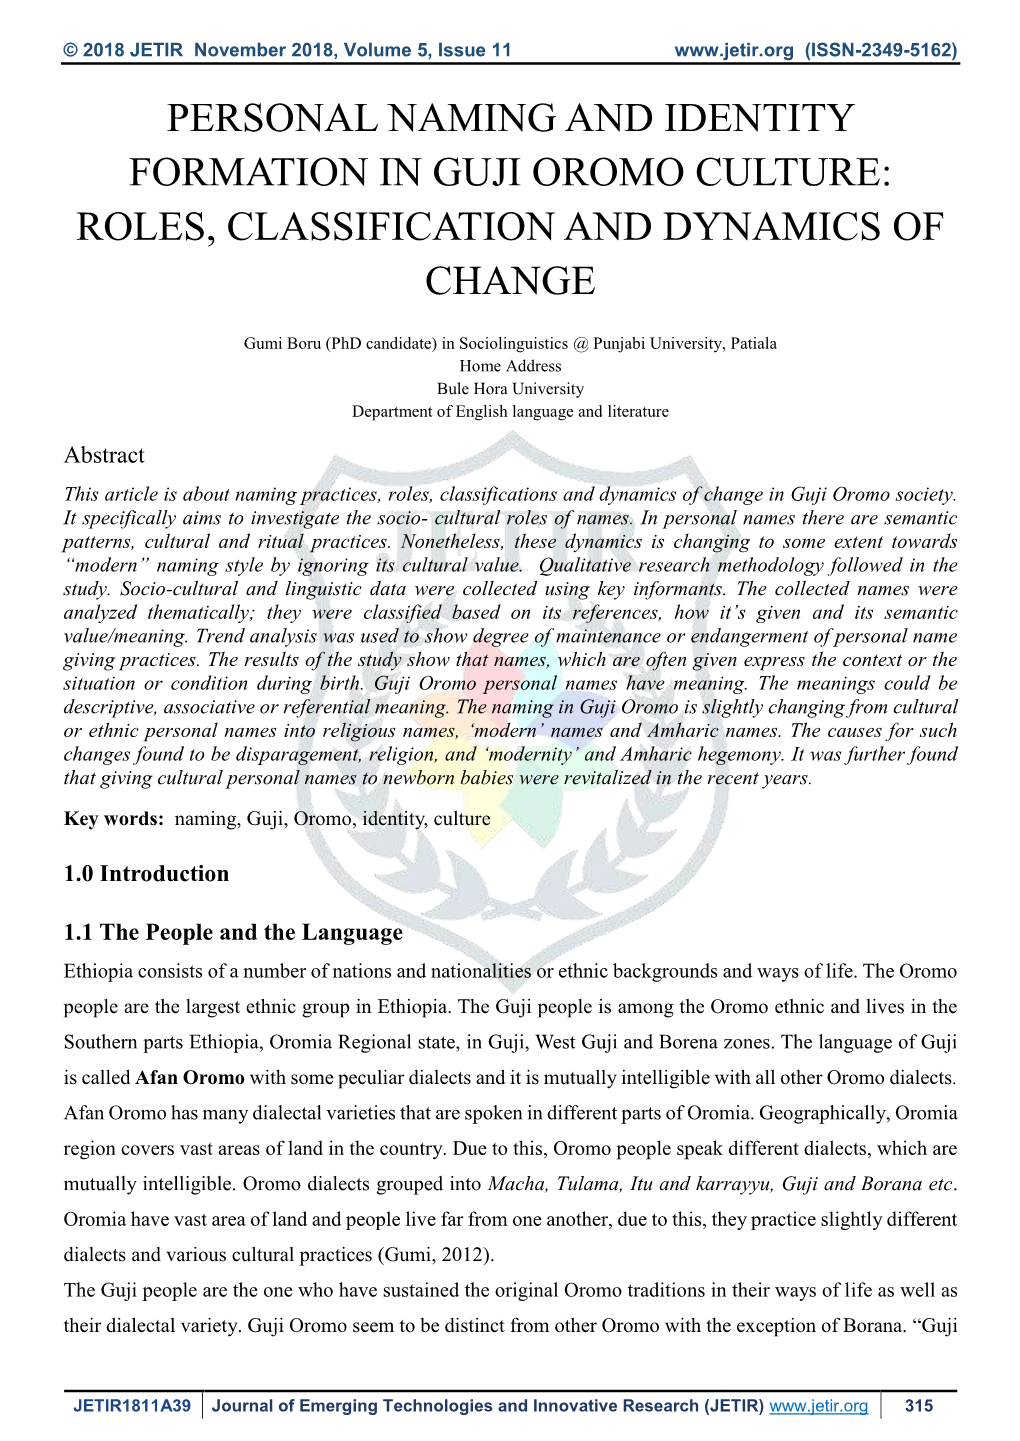 Personal Naming and Identity Formation in Guji Oromo Culture: Roles, Classification and Dynamics of Change